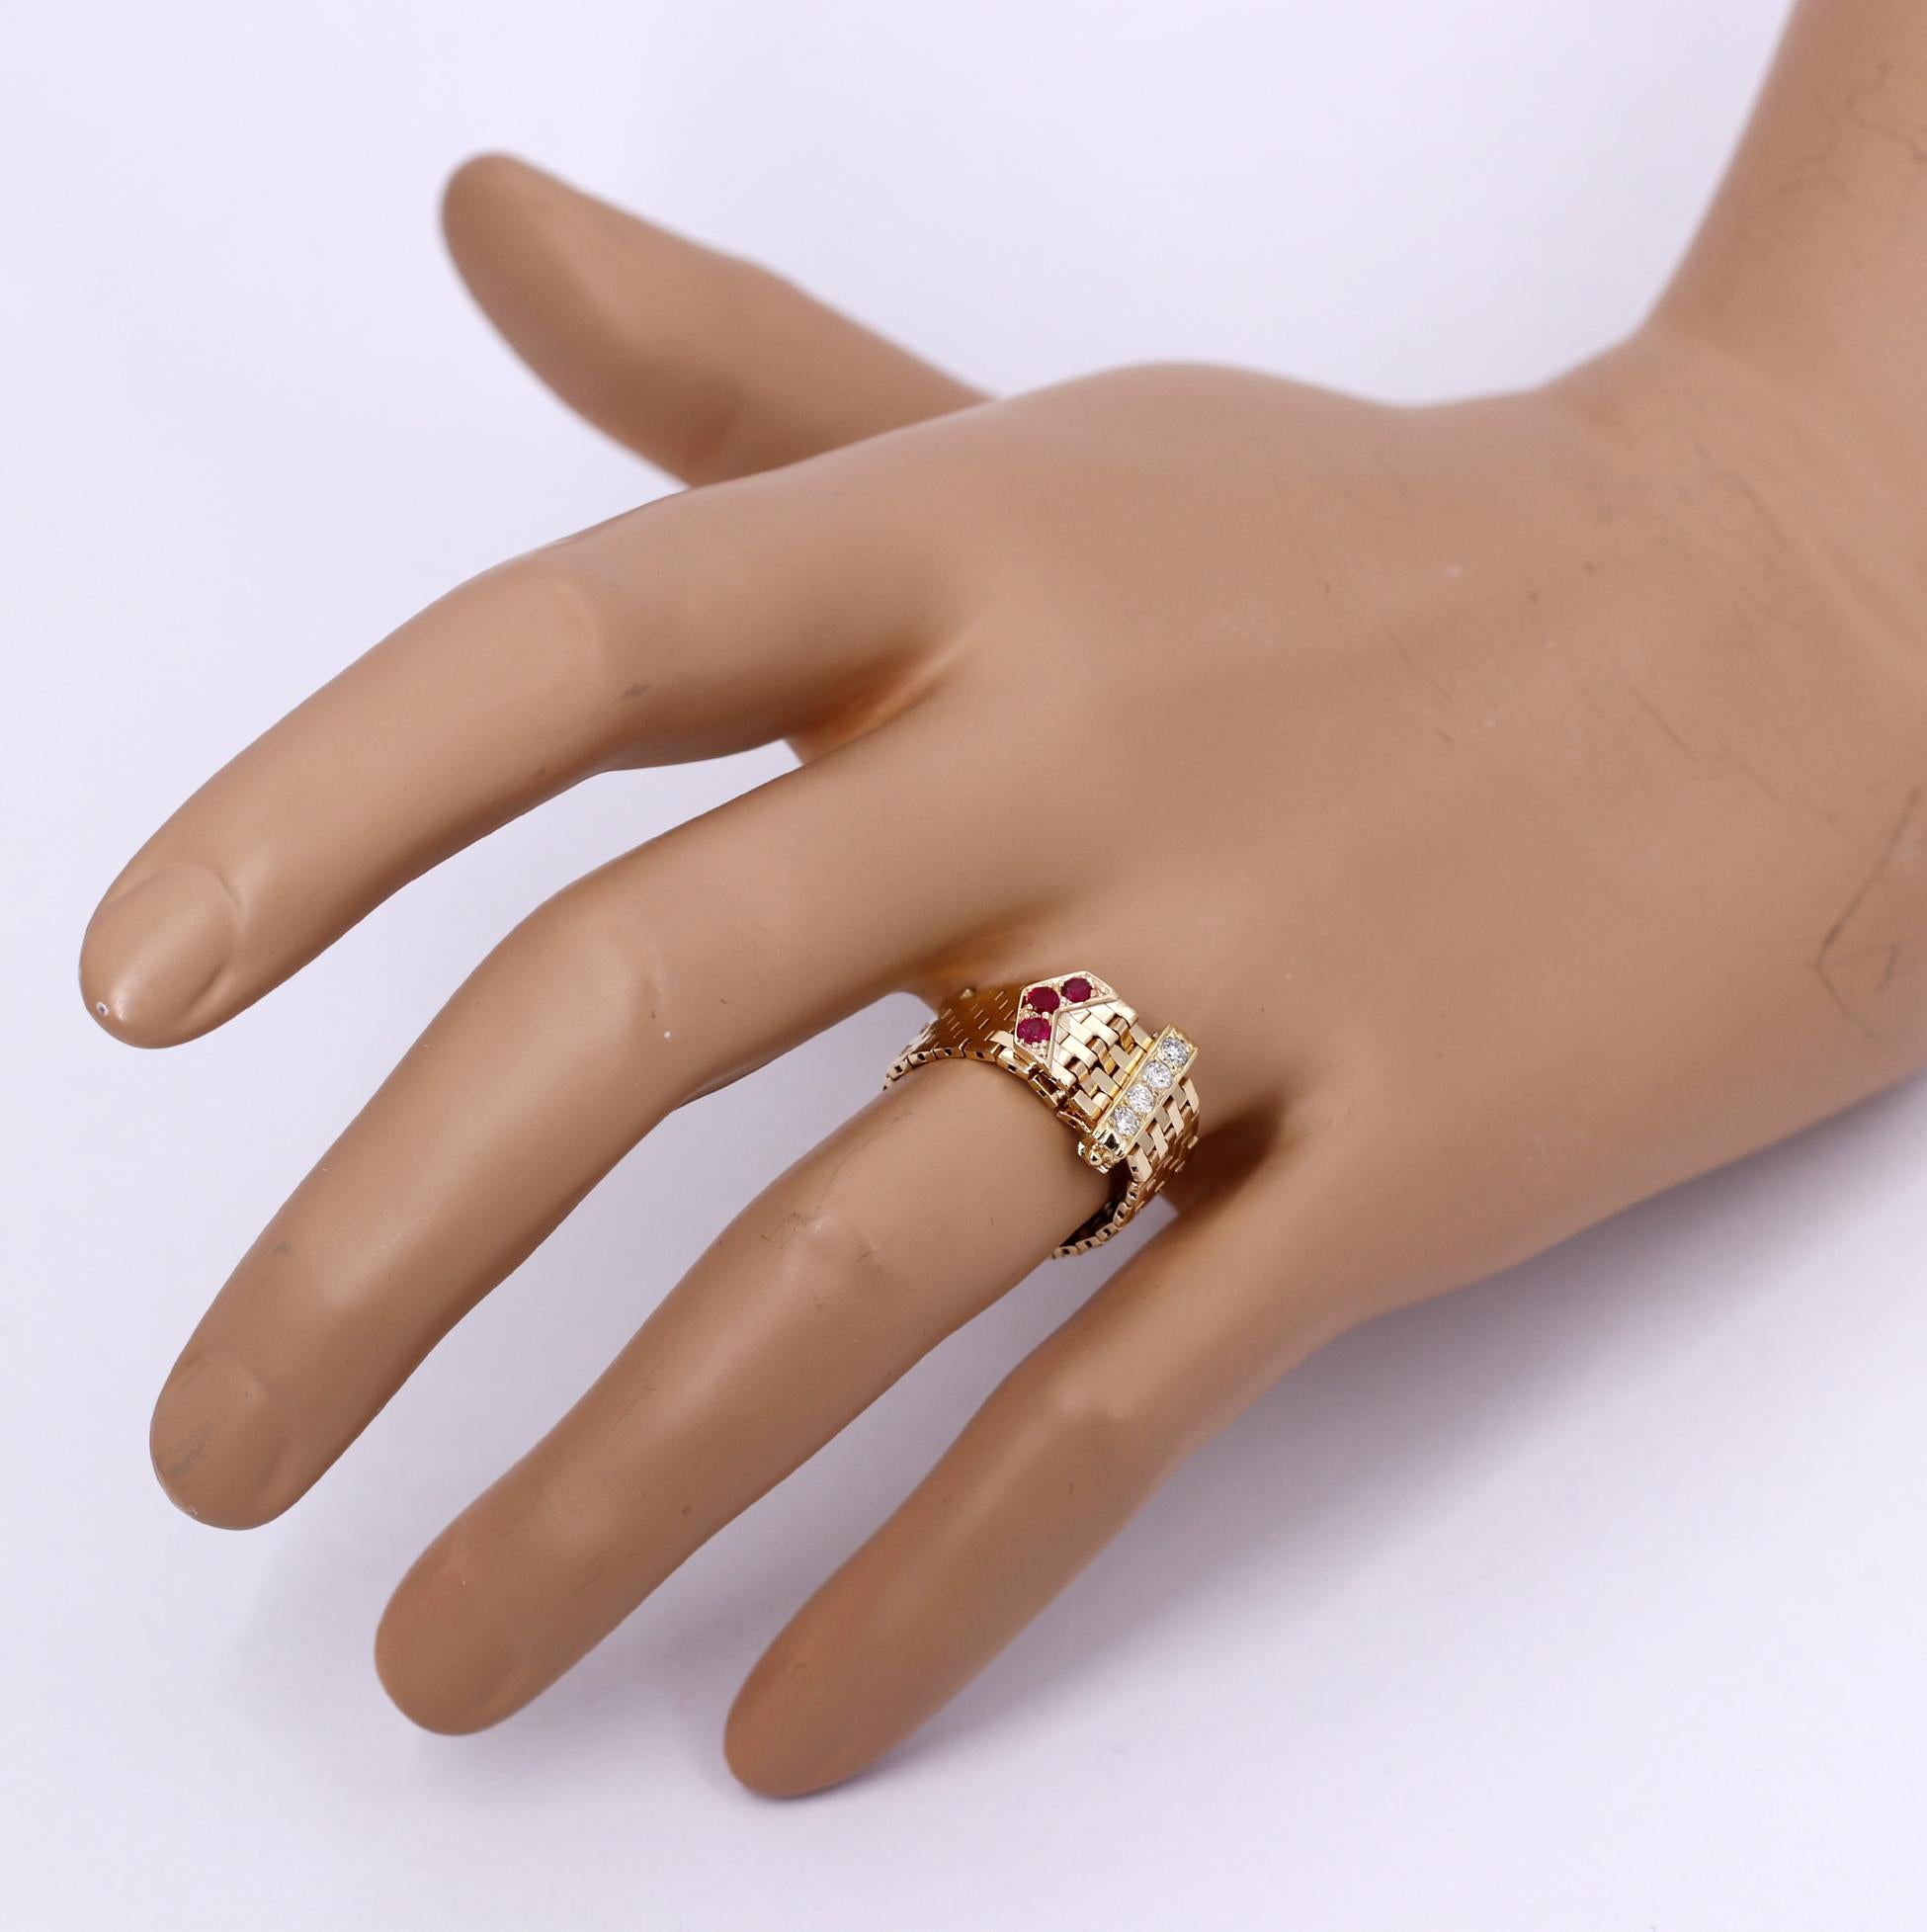 A 14K yellow gold ring measuring 3/8 inch wide, with a buckle design, and set with diamonds, rubies. The buckle is set with 4 round brilliant cut diamonds weighing 0.16 carats, and the tongue is set with 3 rubies weighing a total of 0.18 carats.